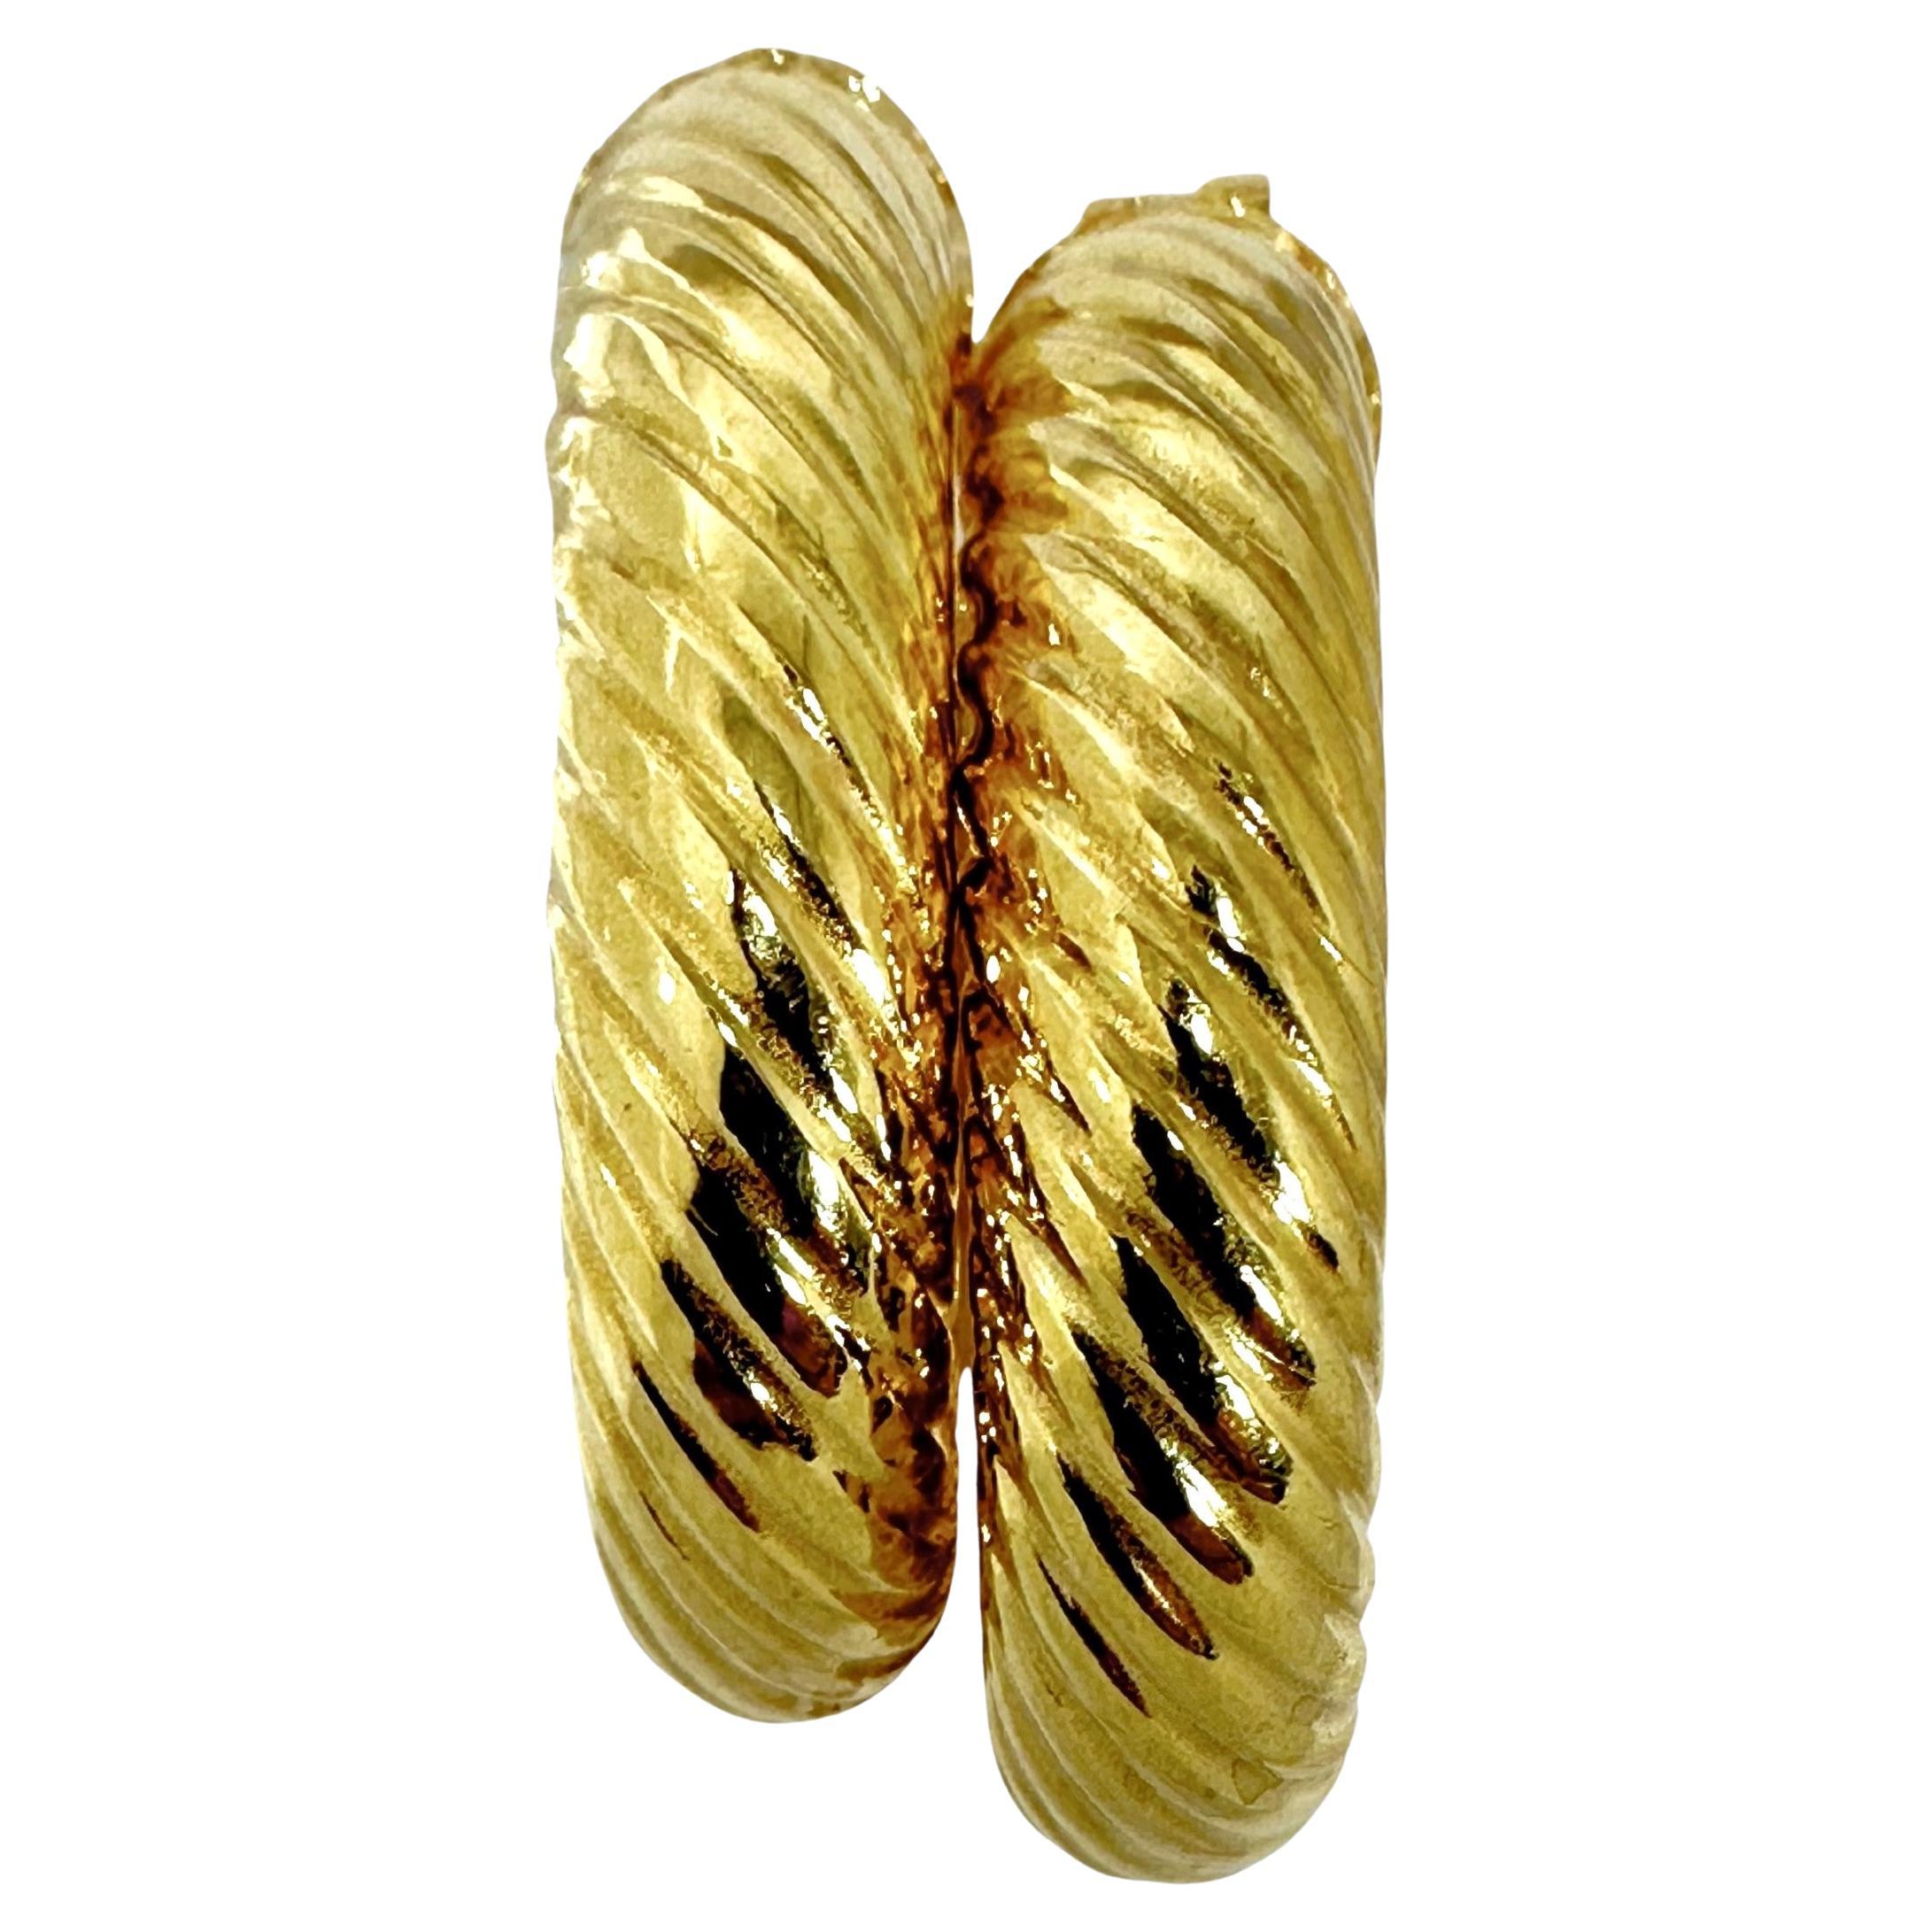 Italian 18K Yellow Gold Twisted Hoop Earrings 1.25 Inches Long x 1/4 Inch Thick For Sale